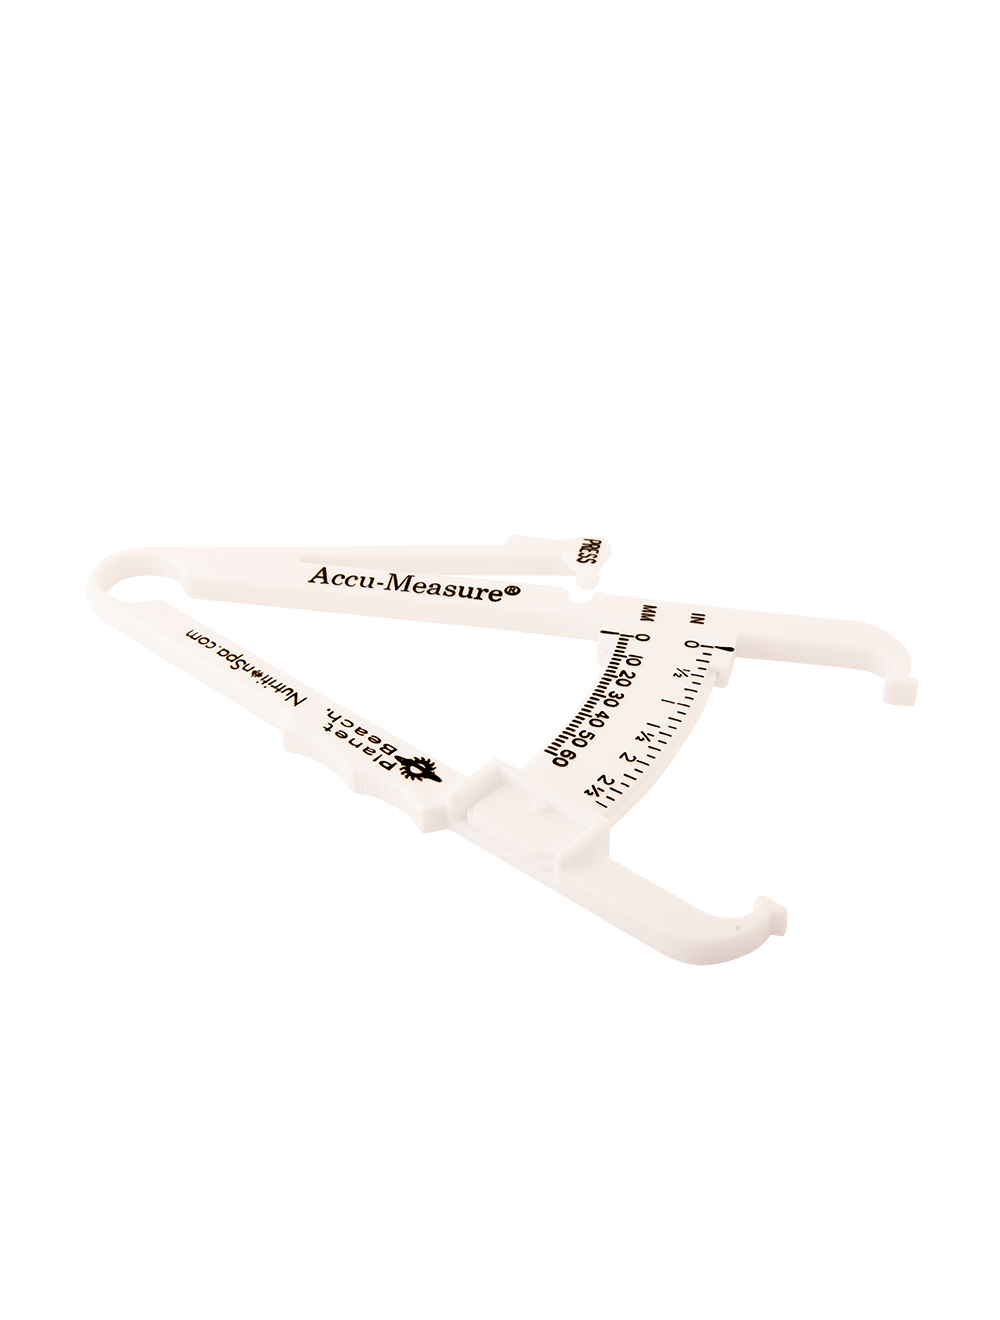 Caliper Body Fat Measuring Tool - Capital Elements 2 Wellness and Fitness